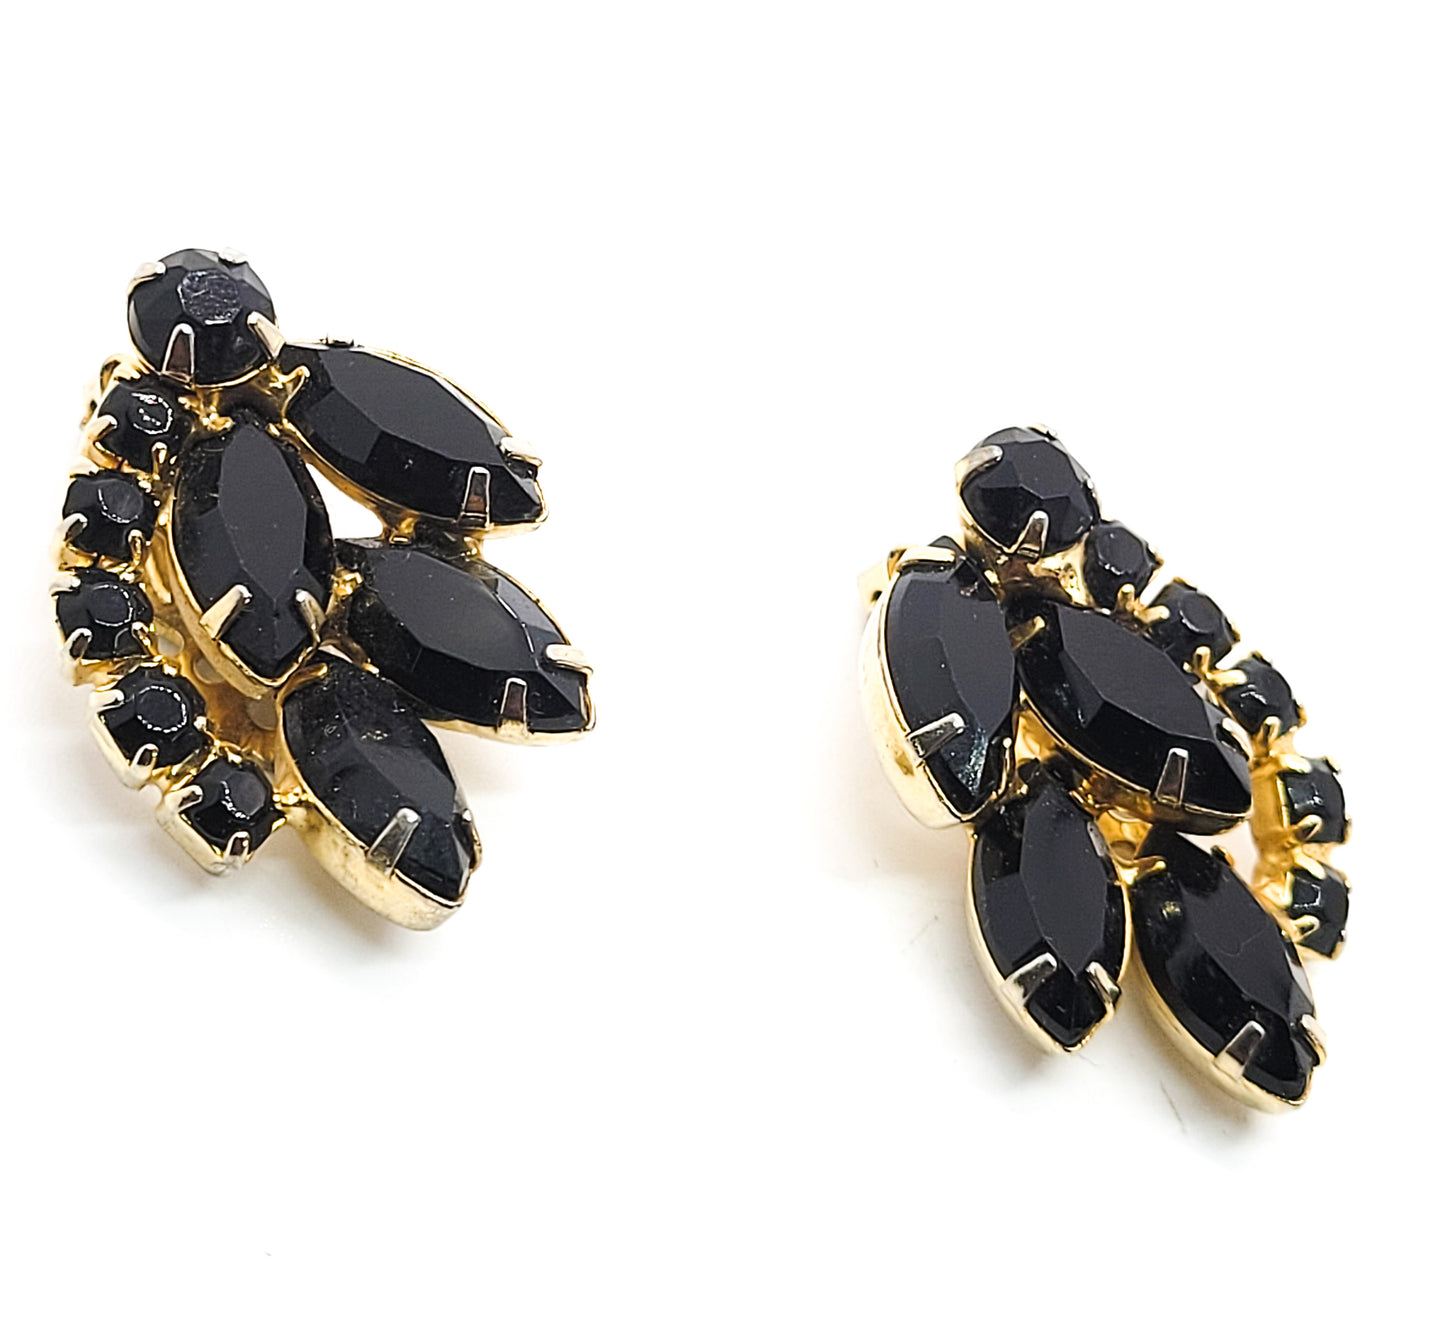 Black and gold prong set vintage Navette cut rhinestone clip on earrings